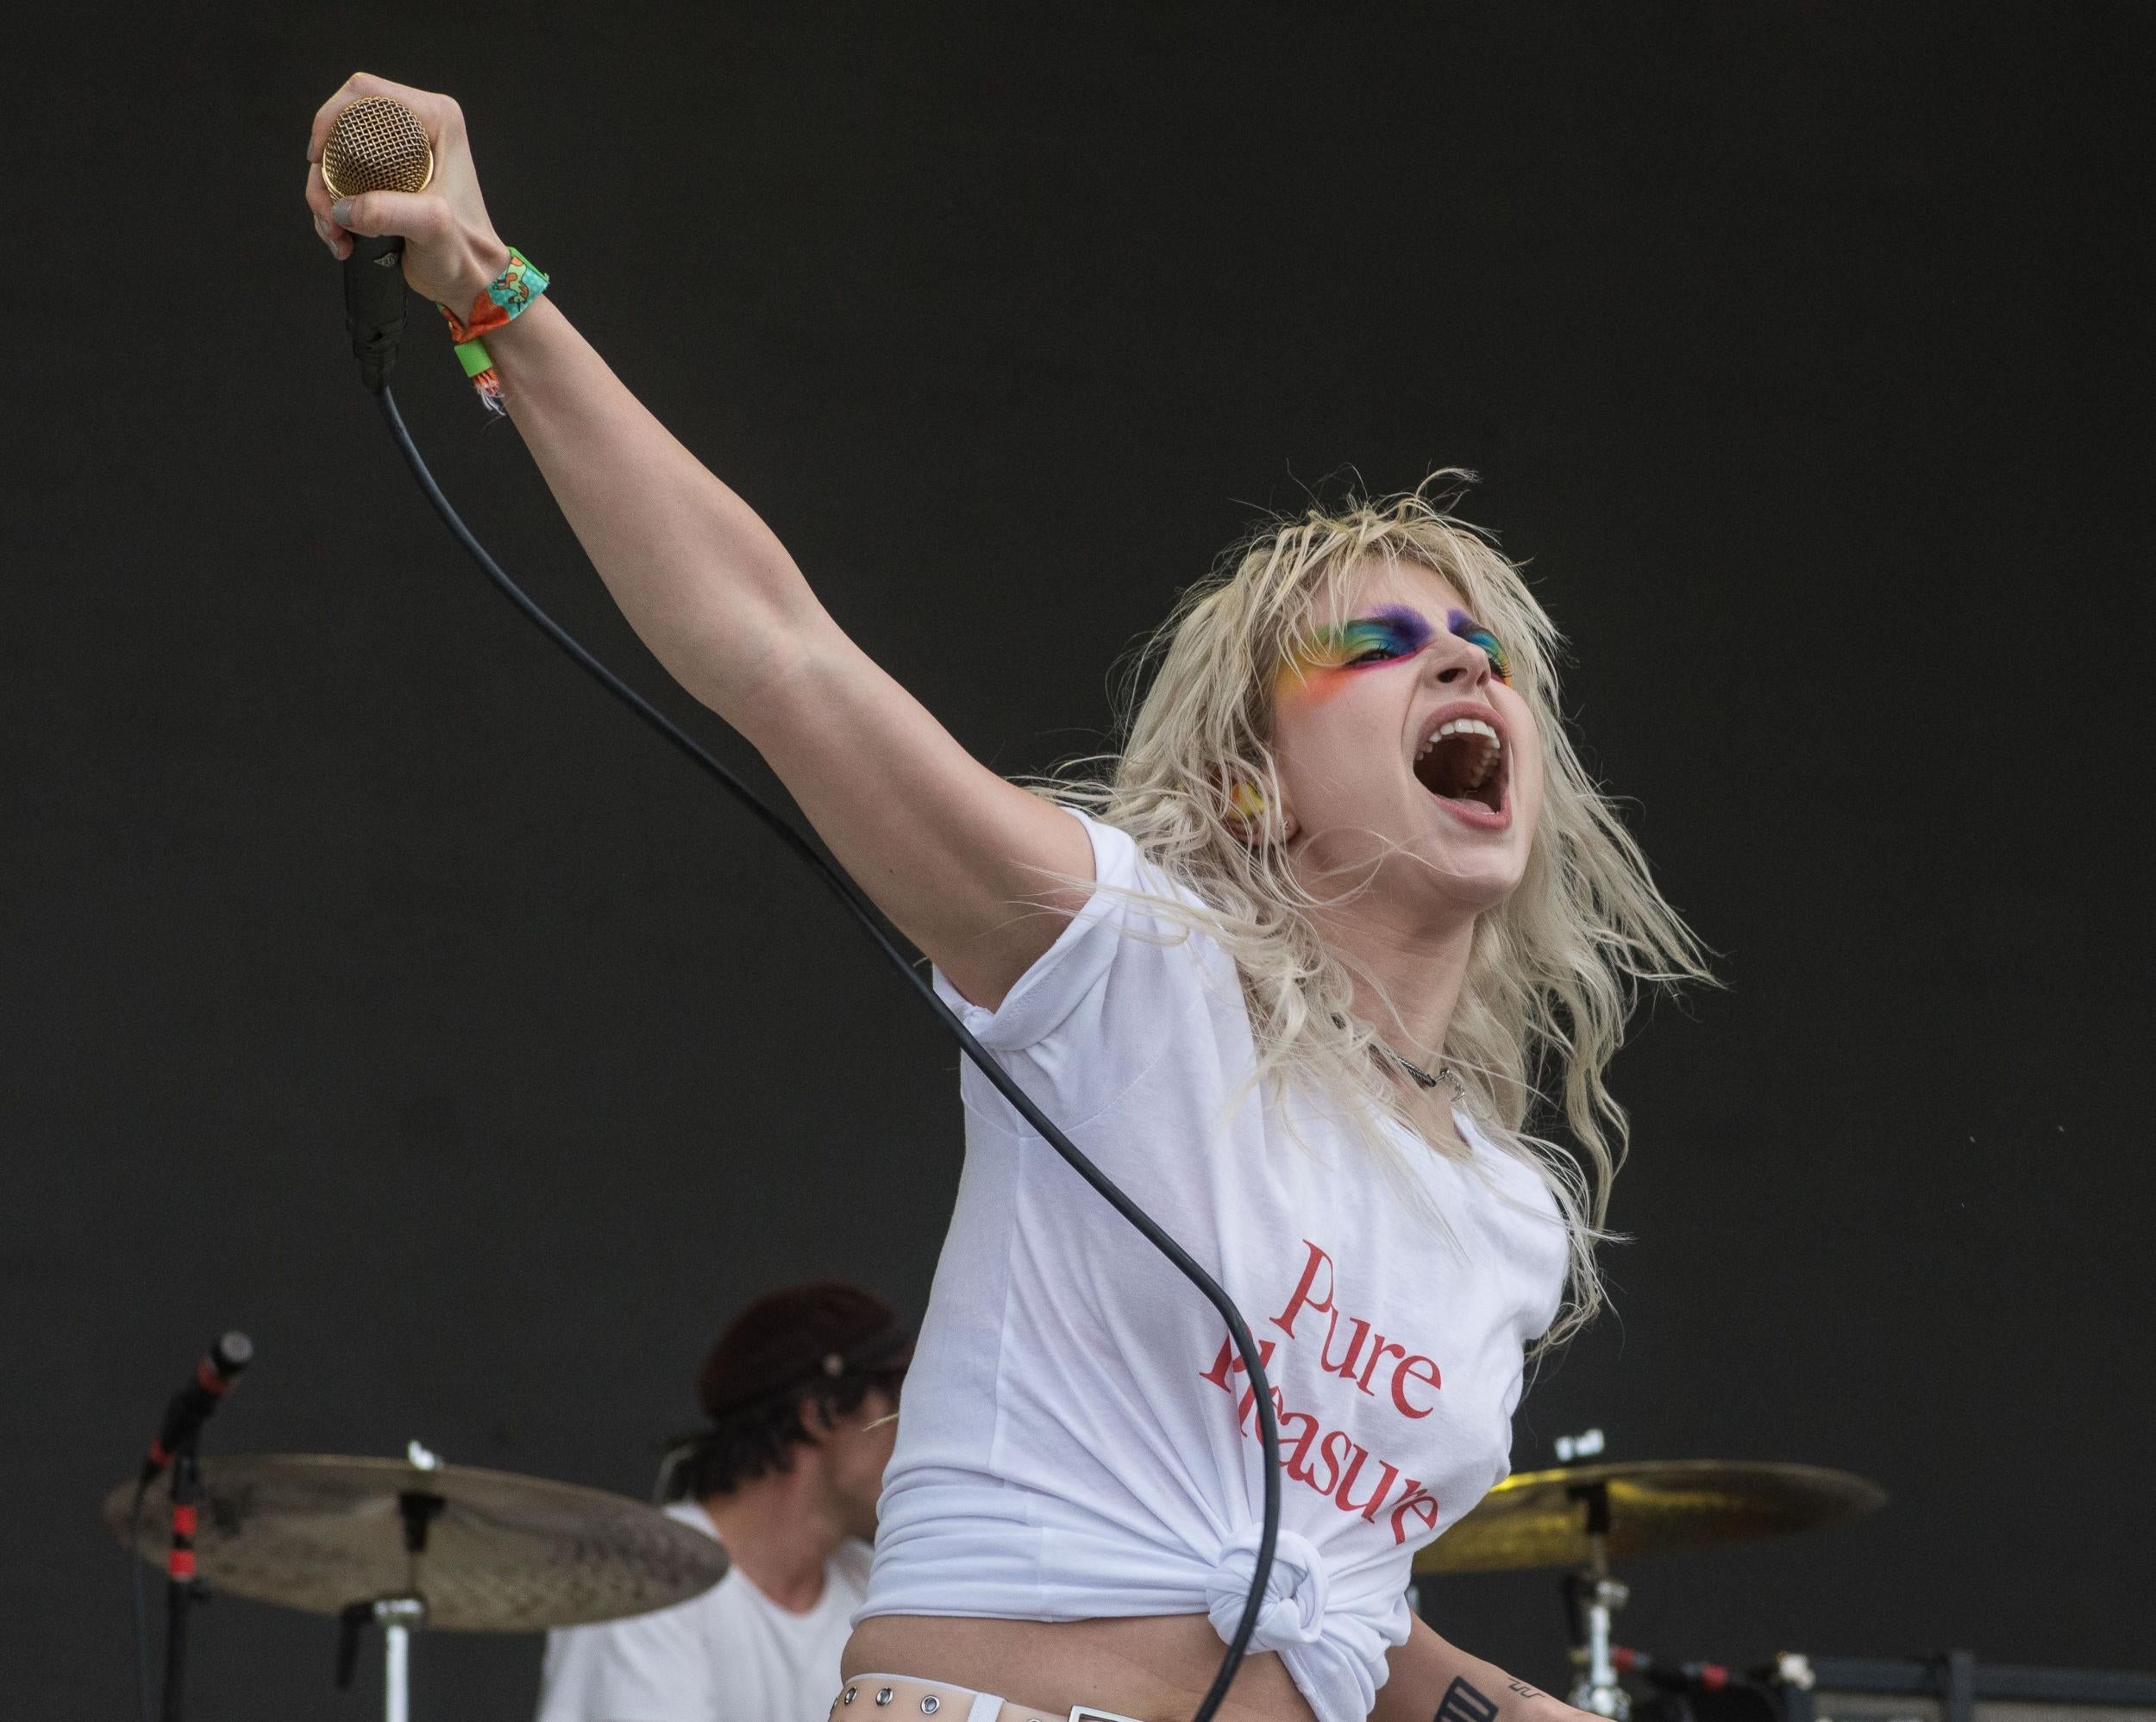 Paramore frontwoman Hayley Williams is releasing new music